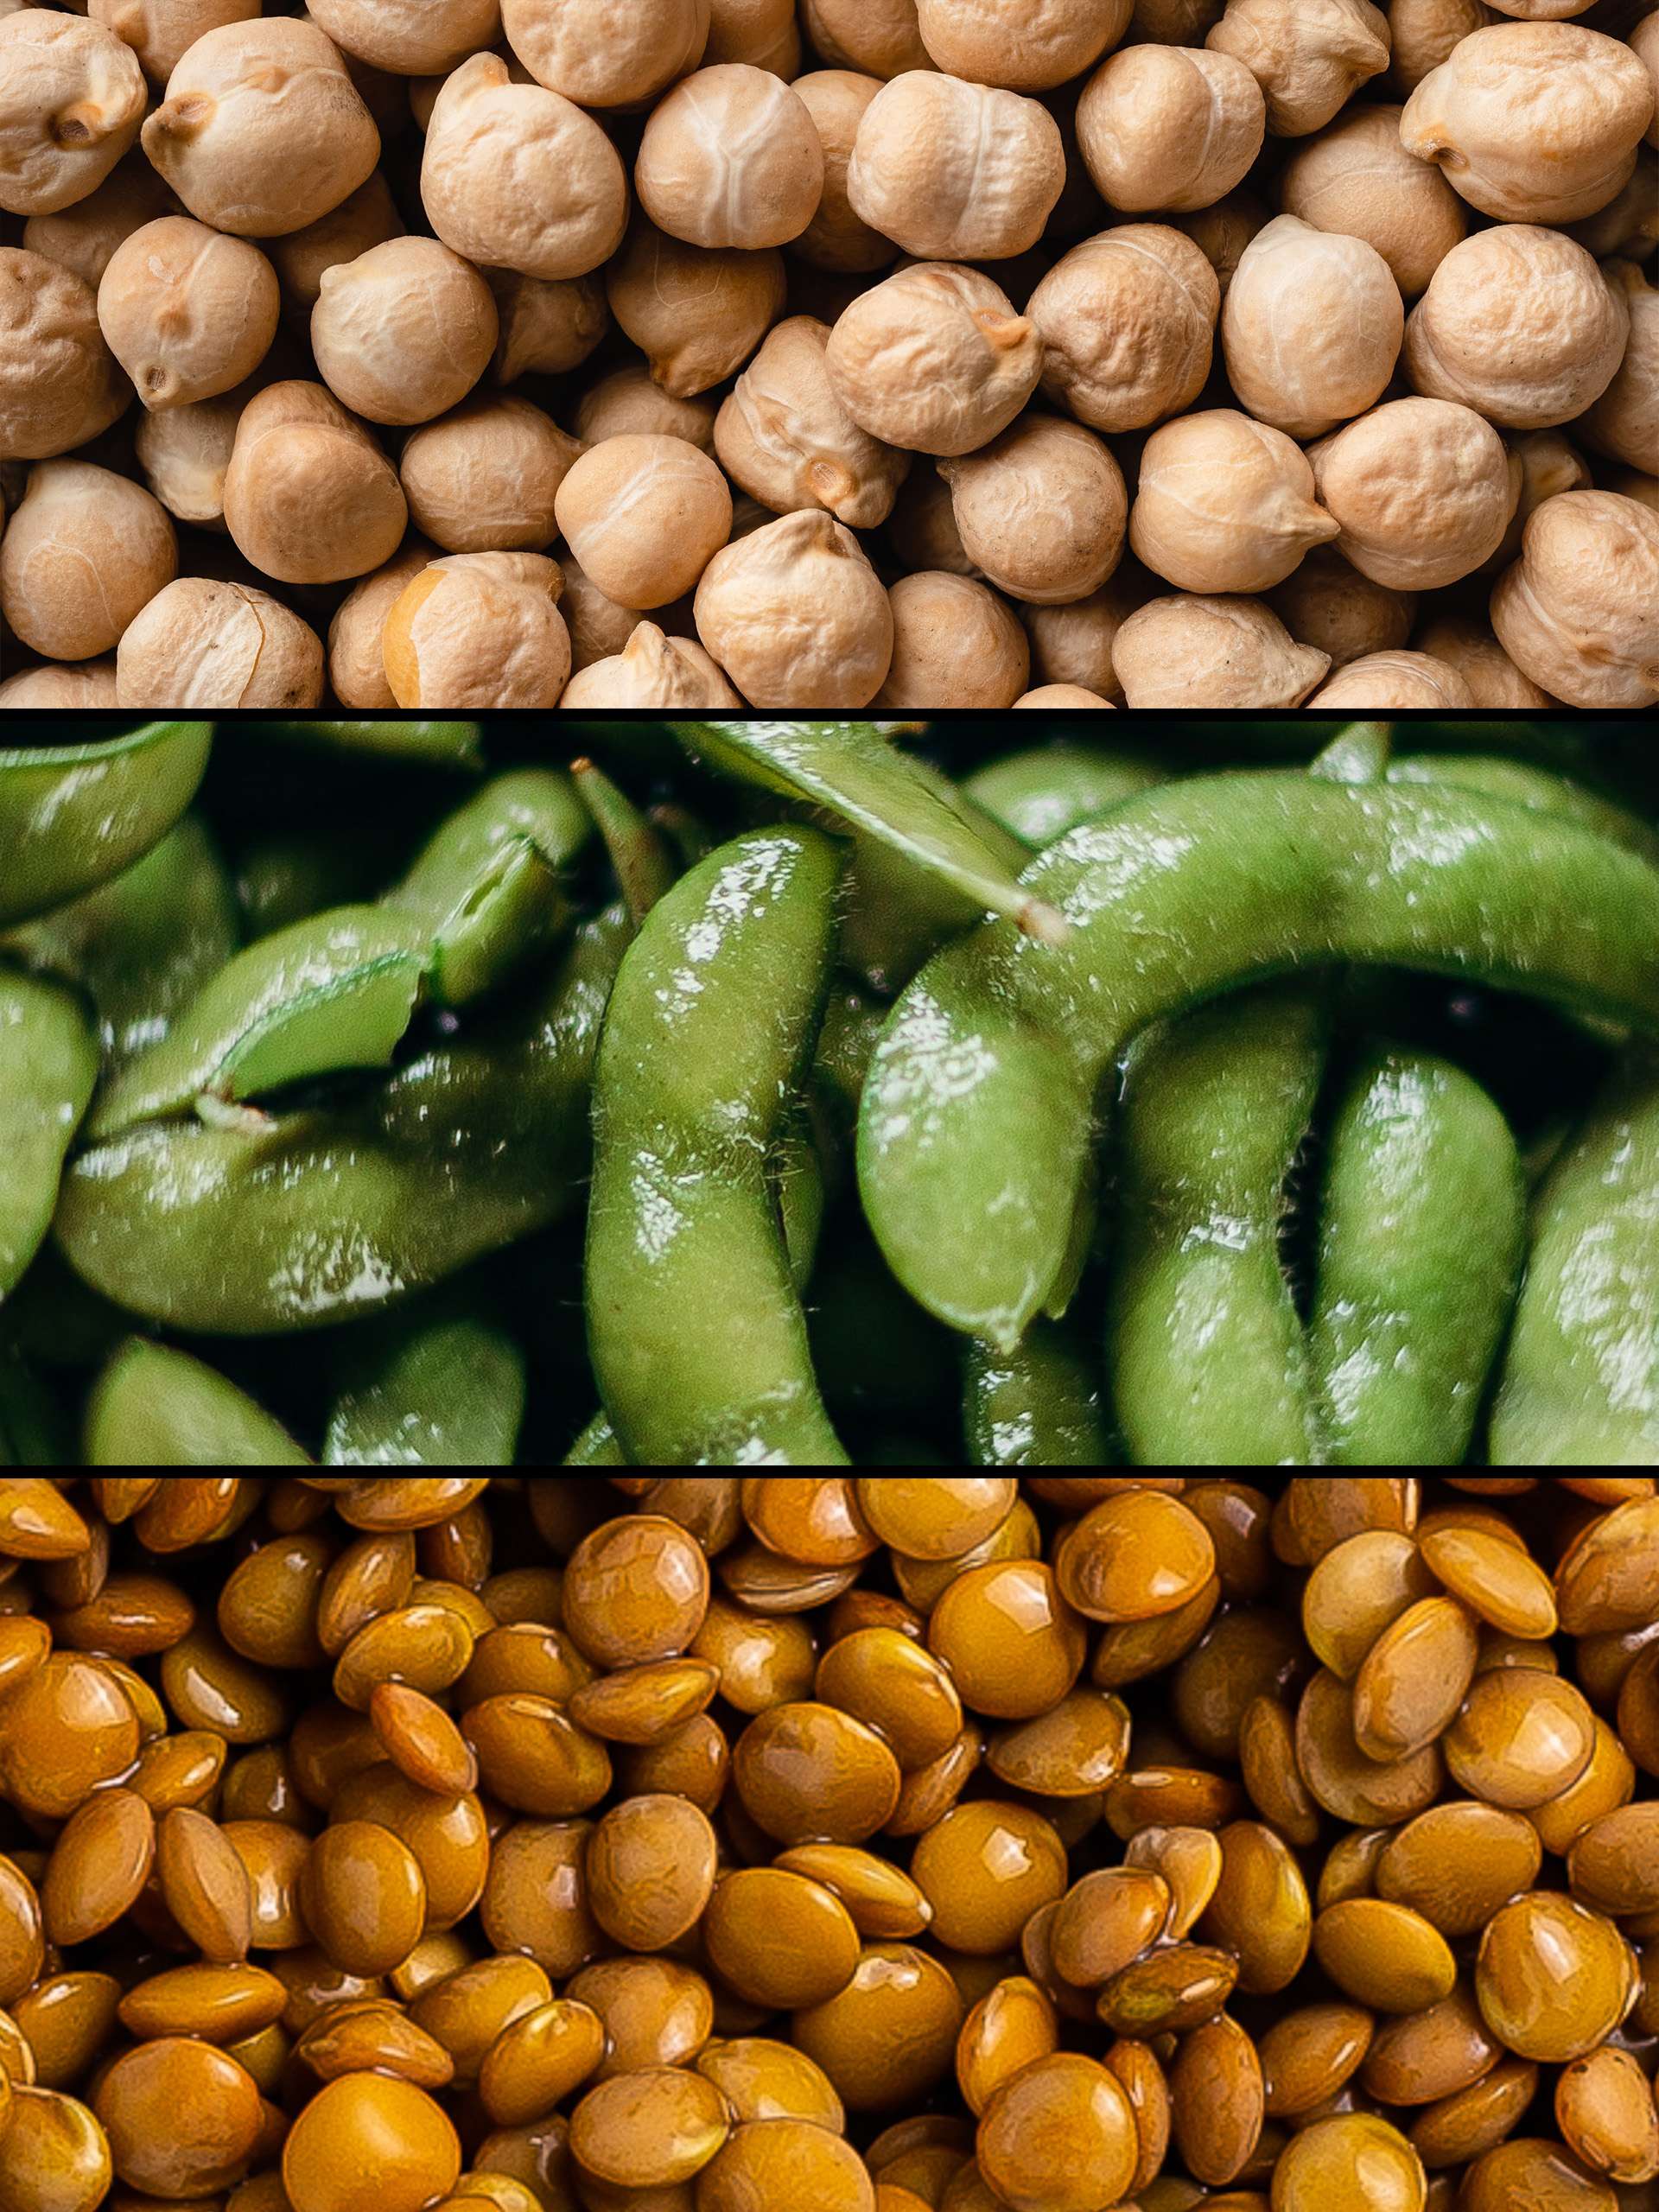 Top 5 Beans and Legumes For a Healthy Diet